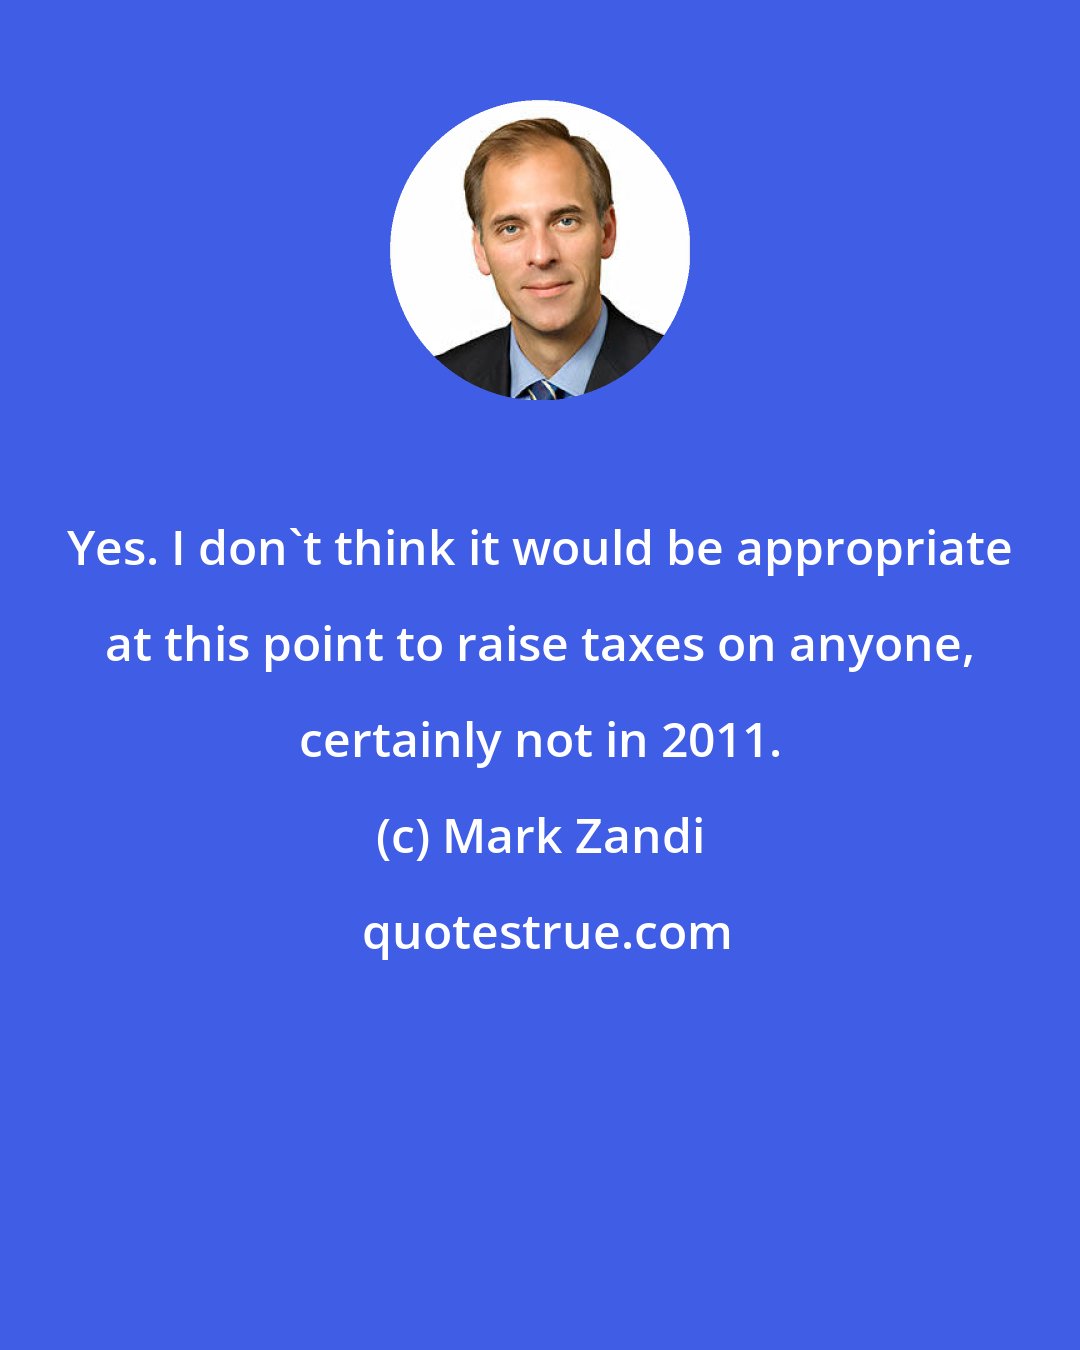 Mark Zandi: Yes. I don't think it would be appropriate at this point to raise taxes on anyone, certainly not in 2011.